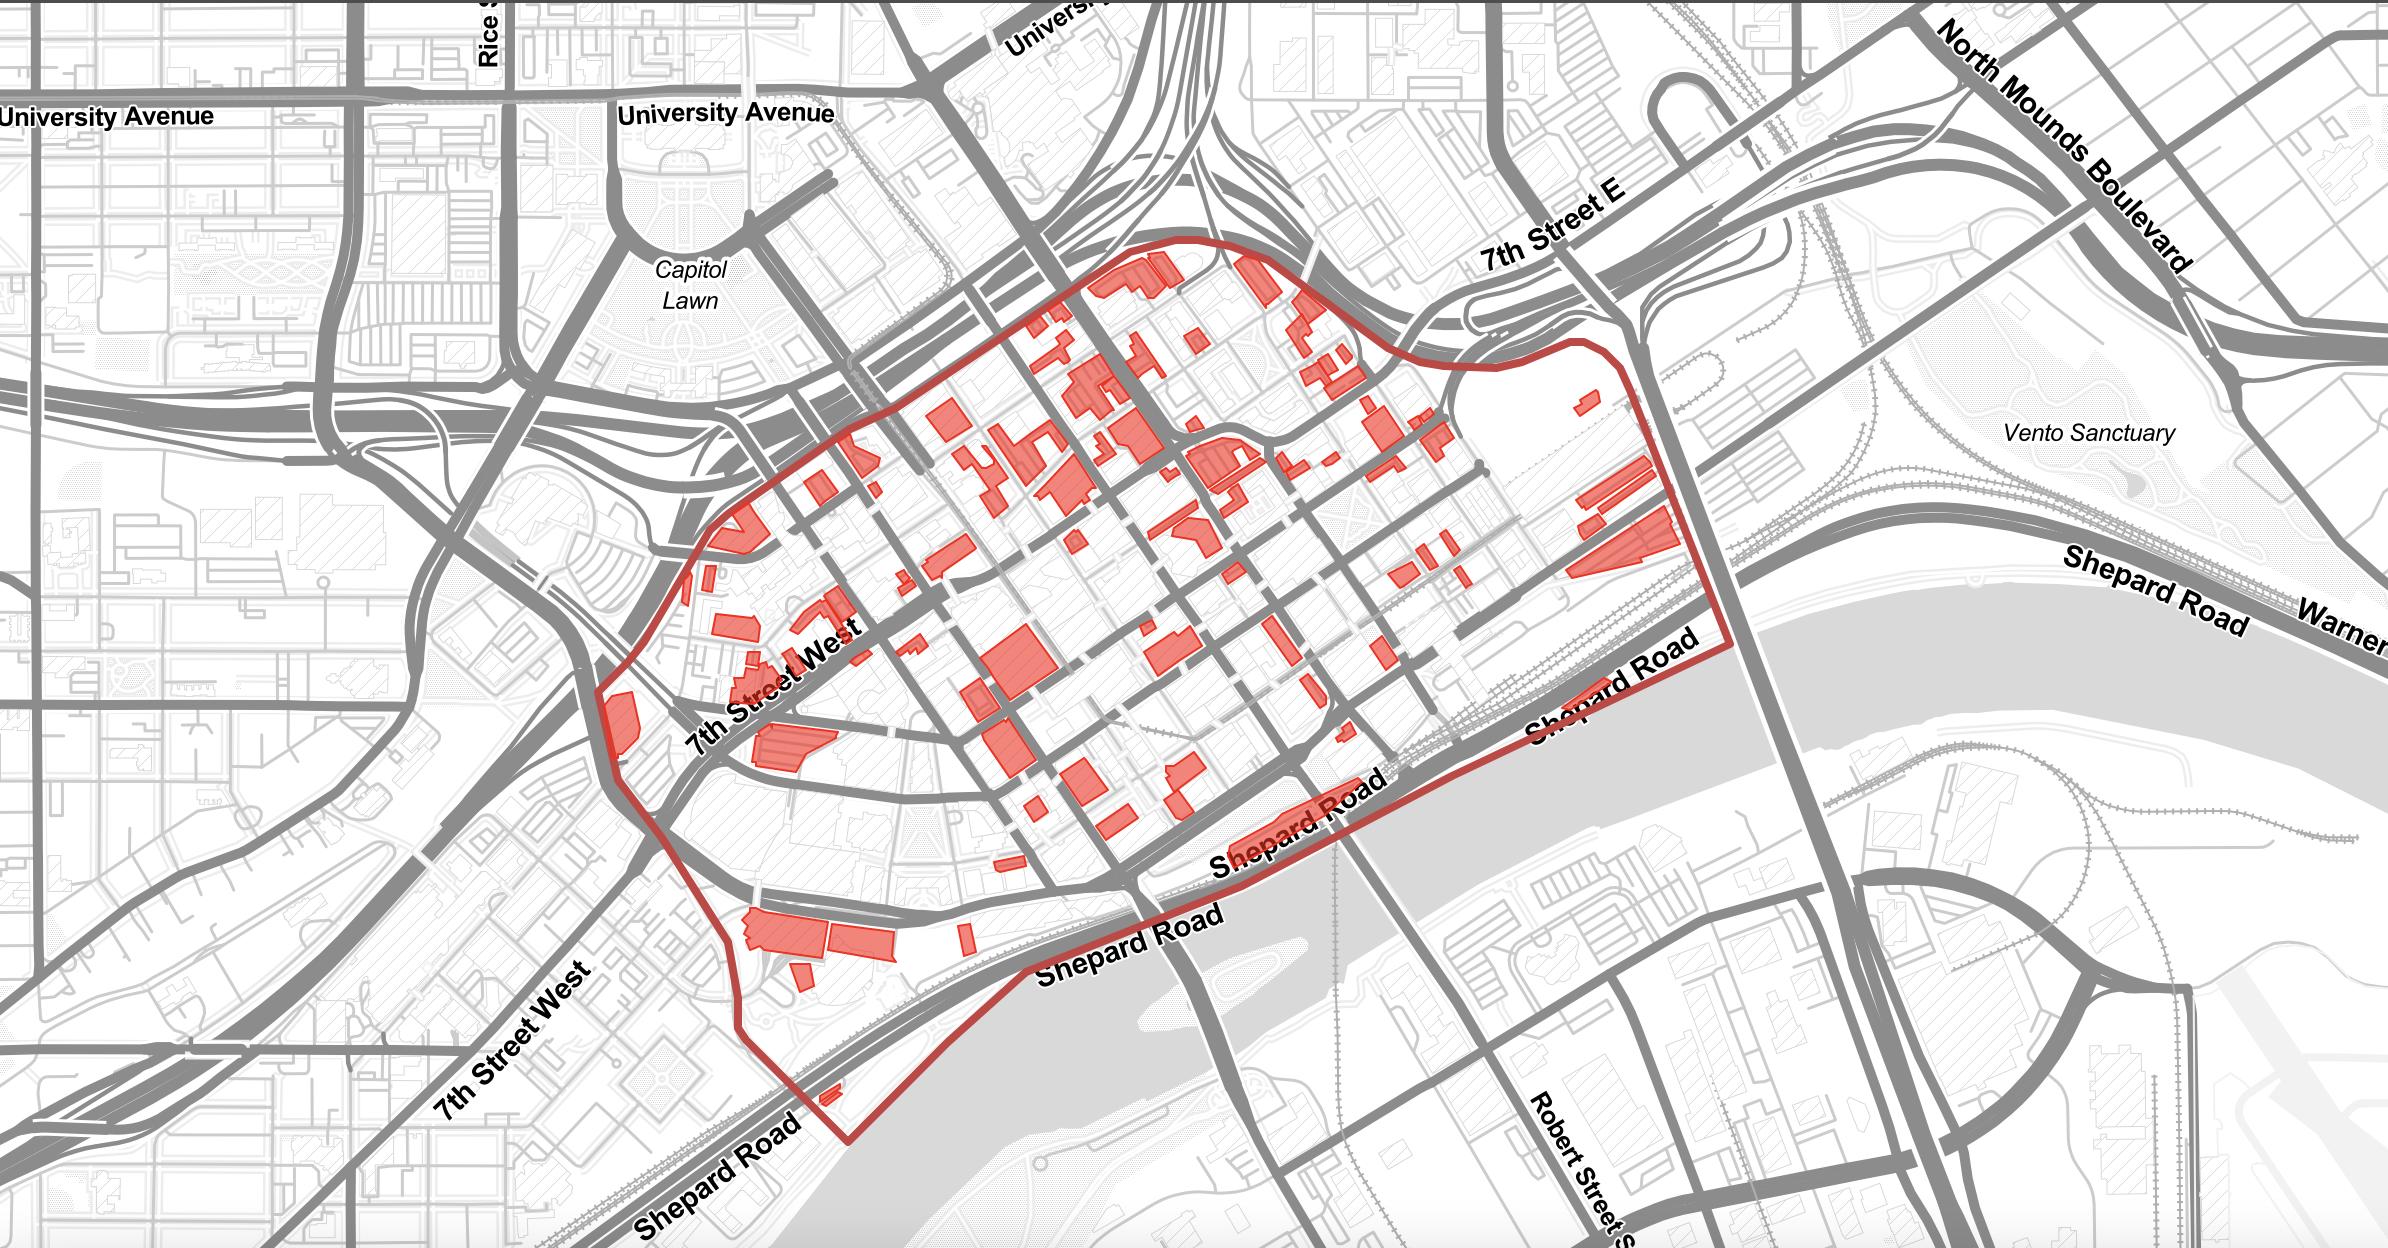 Downtown St. Paul aerial map showing parking lots